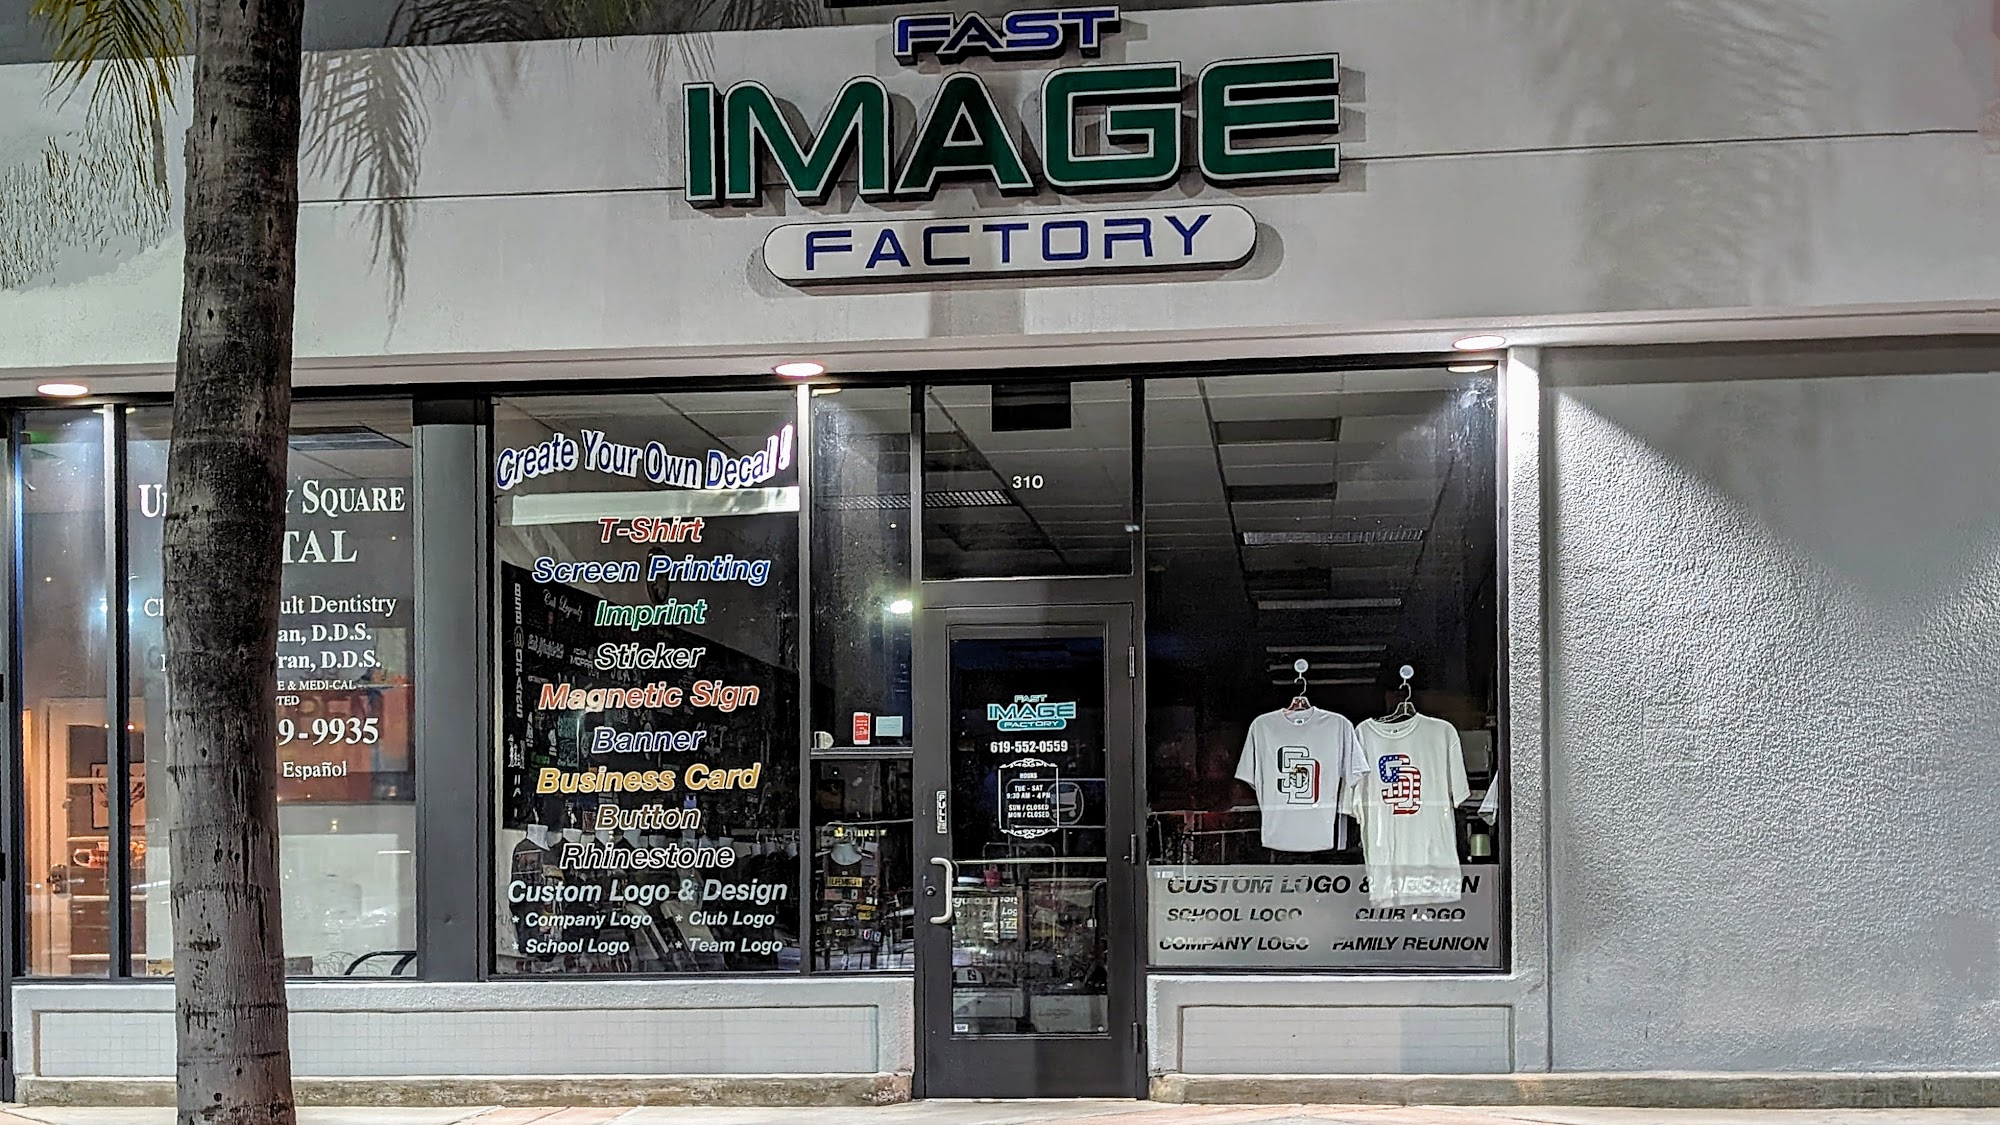 Fast Image Factory